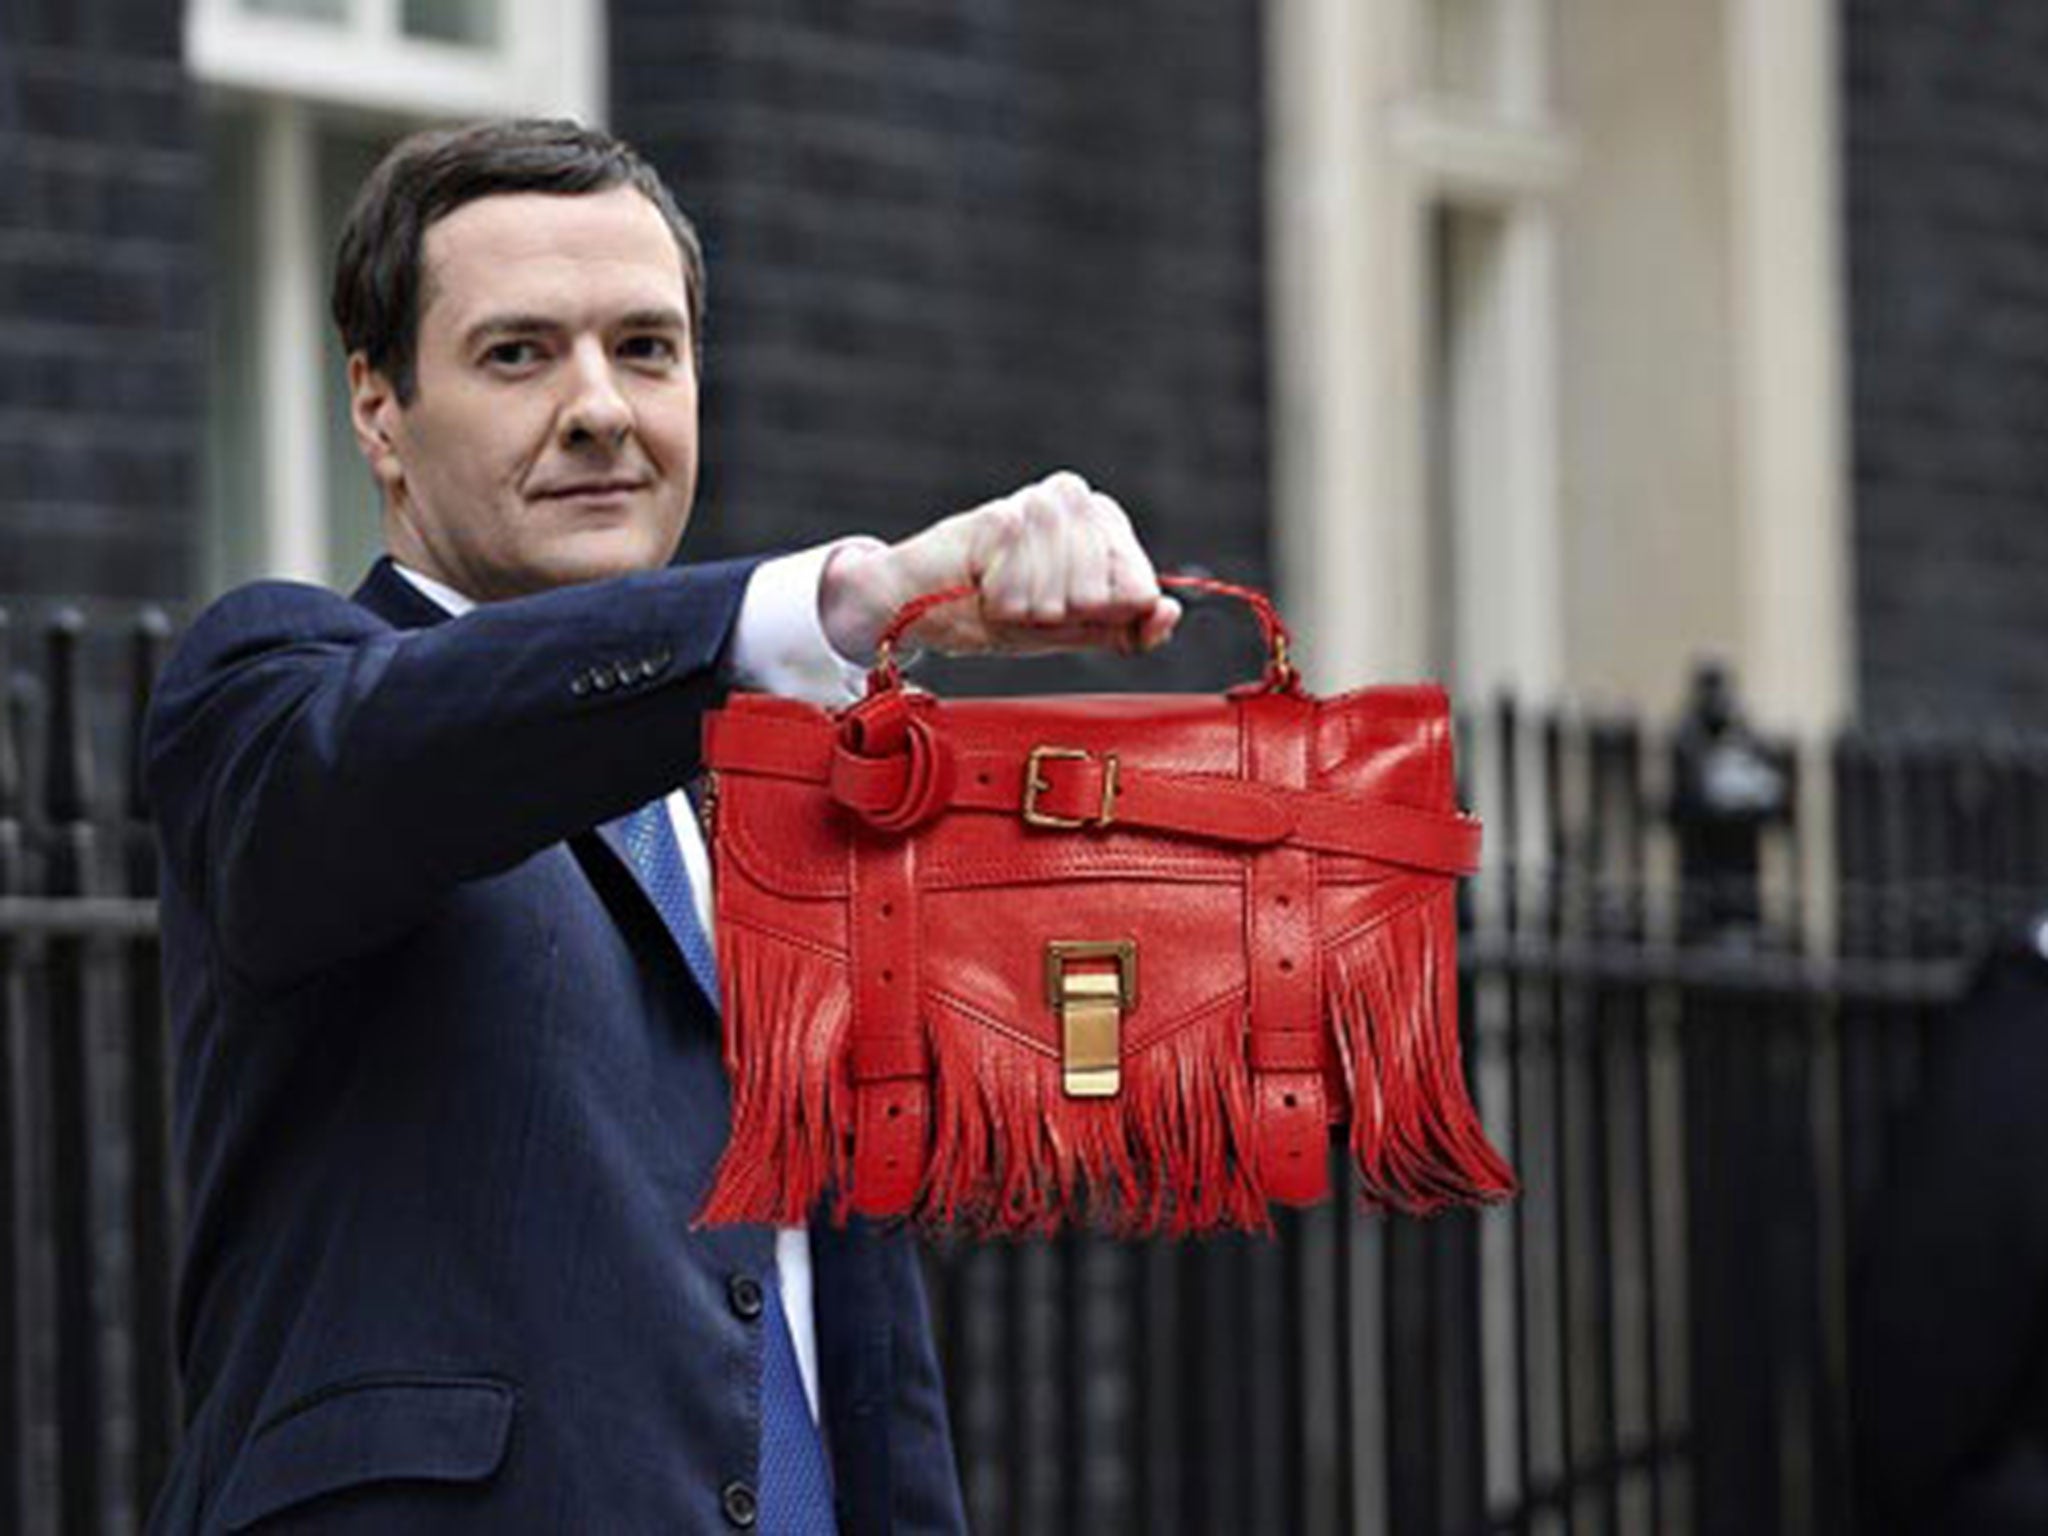 Parody of George Osborne holding a red Proenza Schoulder handbag - This image has been photoshopped by Lyst to accompany its Fashion Budget findings